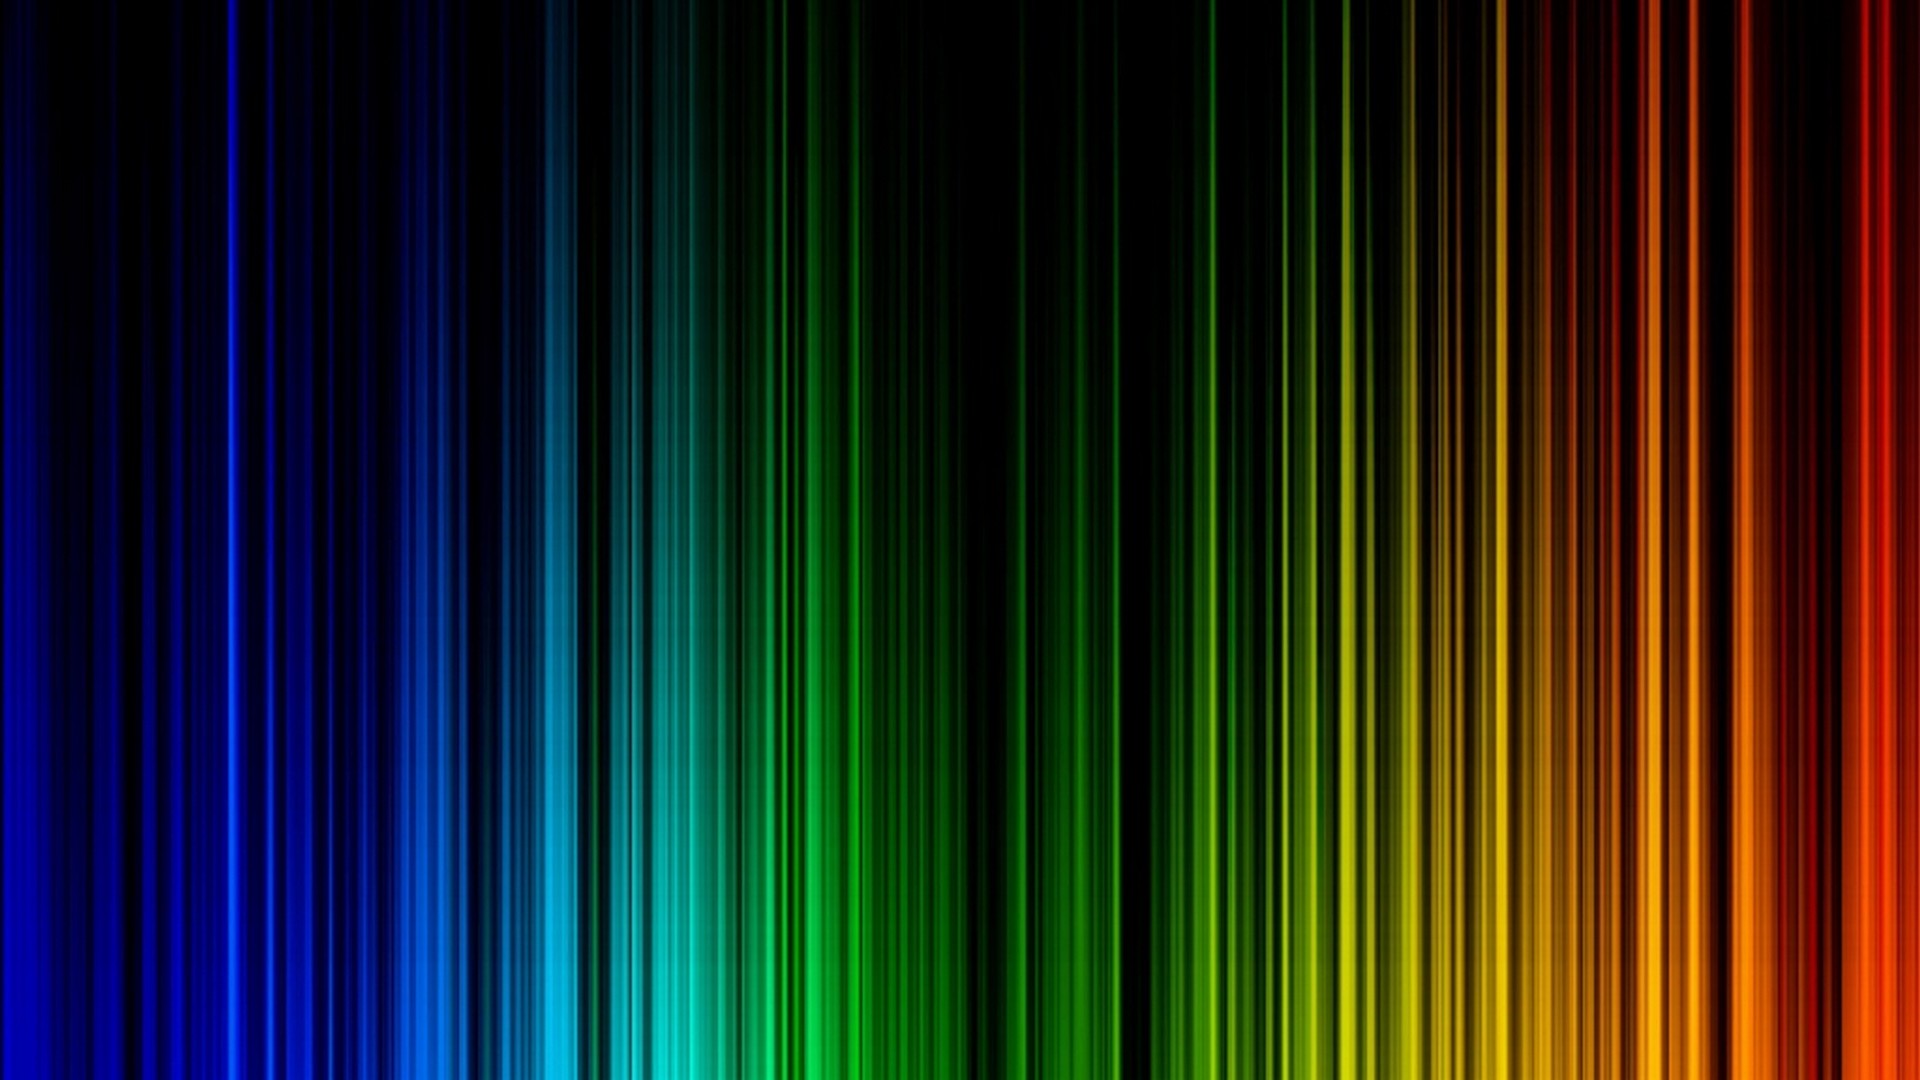 Rainbow HD Wallpaper with image resolution 1920x1080 pixel. You can make this wallpaper for your Desktop Computer Backgrounds, Mac Wallpapers, Android Lock screen or iPhone Screensavers